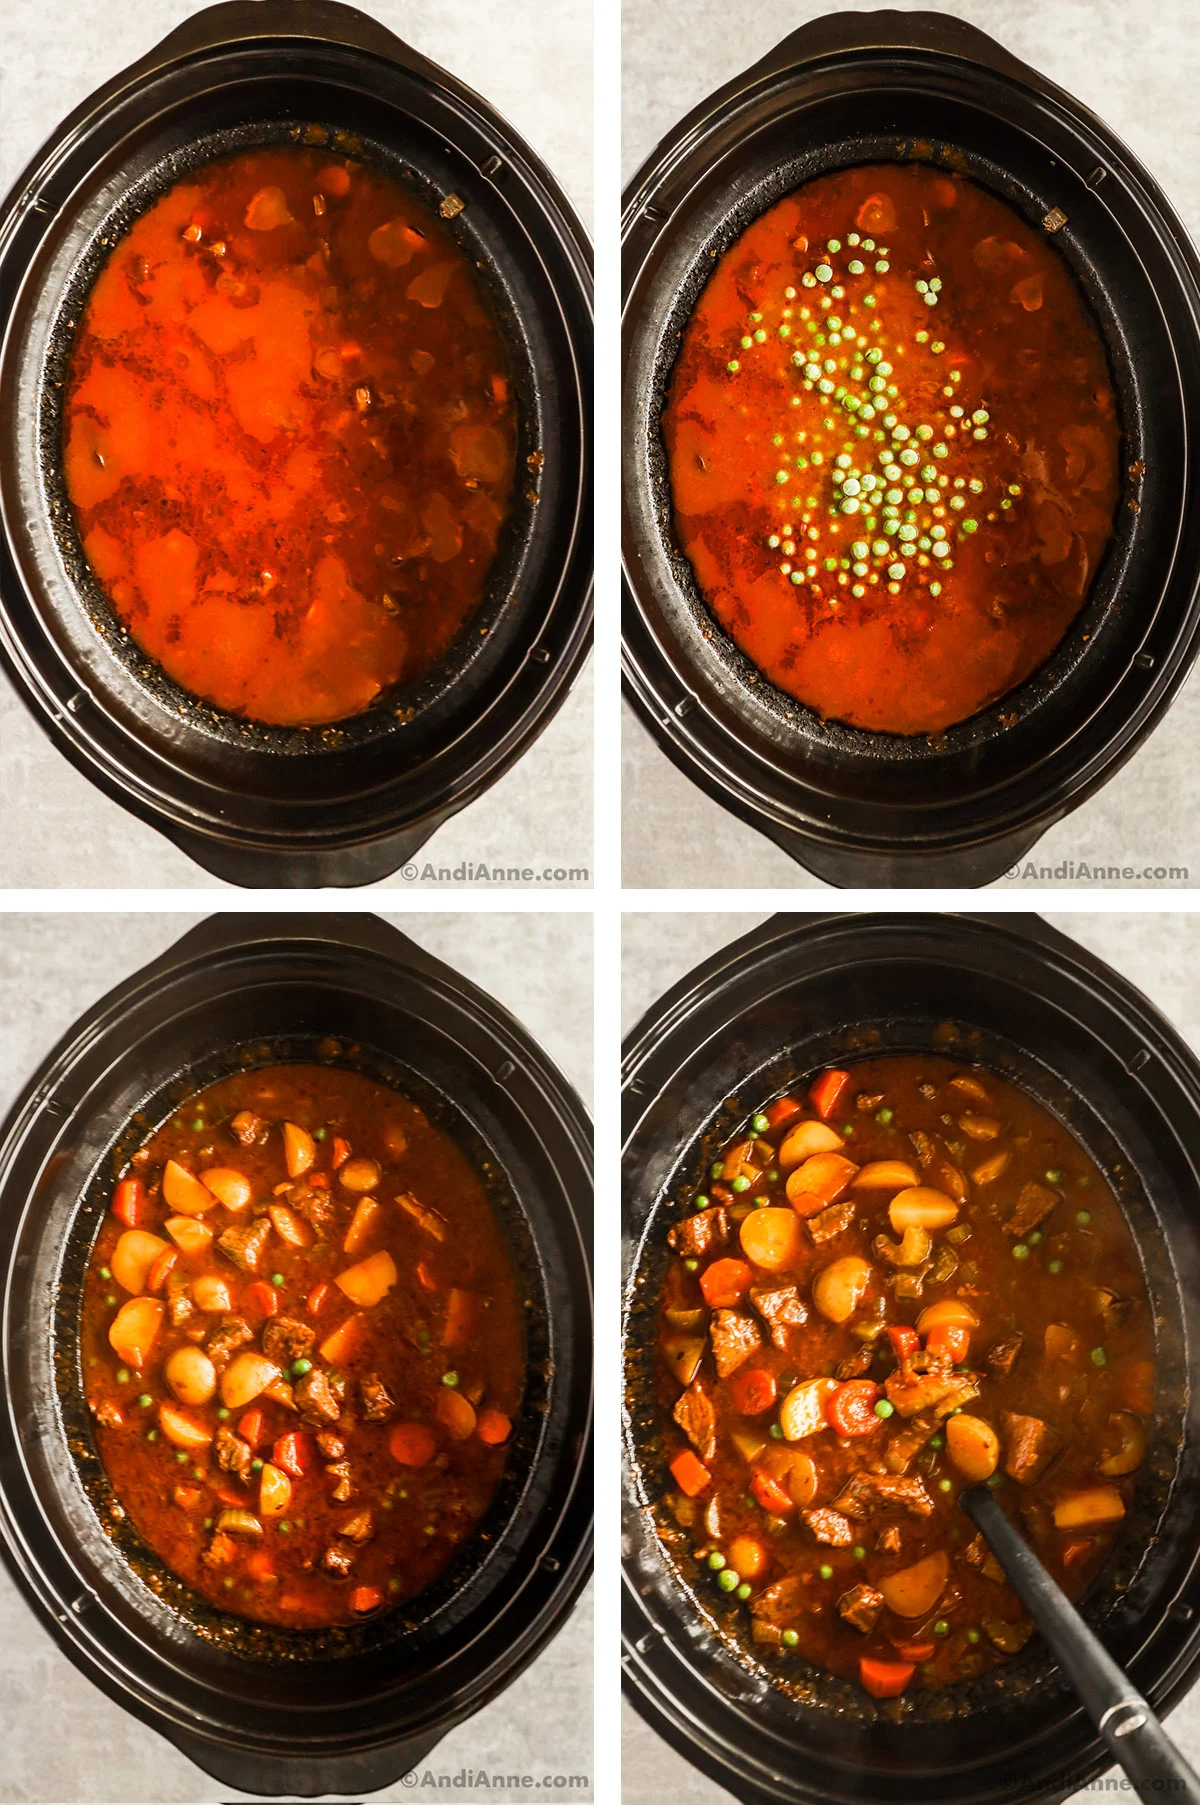 Four images of a slow cooker, first is cooked stew with red sauce on top, second is frozen peas dumped into cooked stew, third is cooked stew, fourth is ladle in cooked stew.